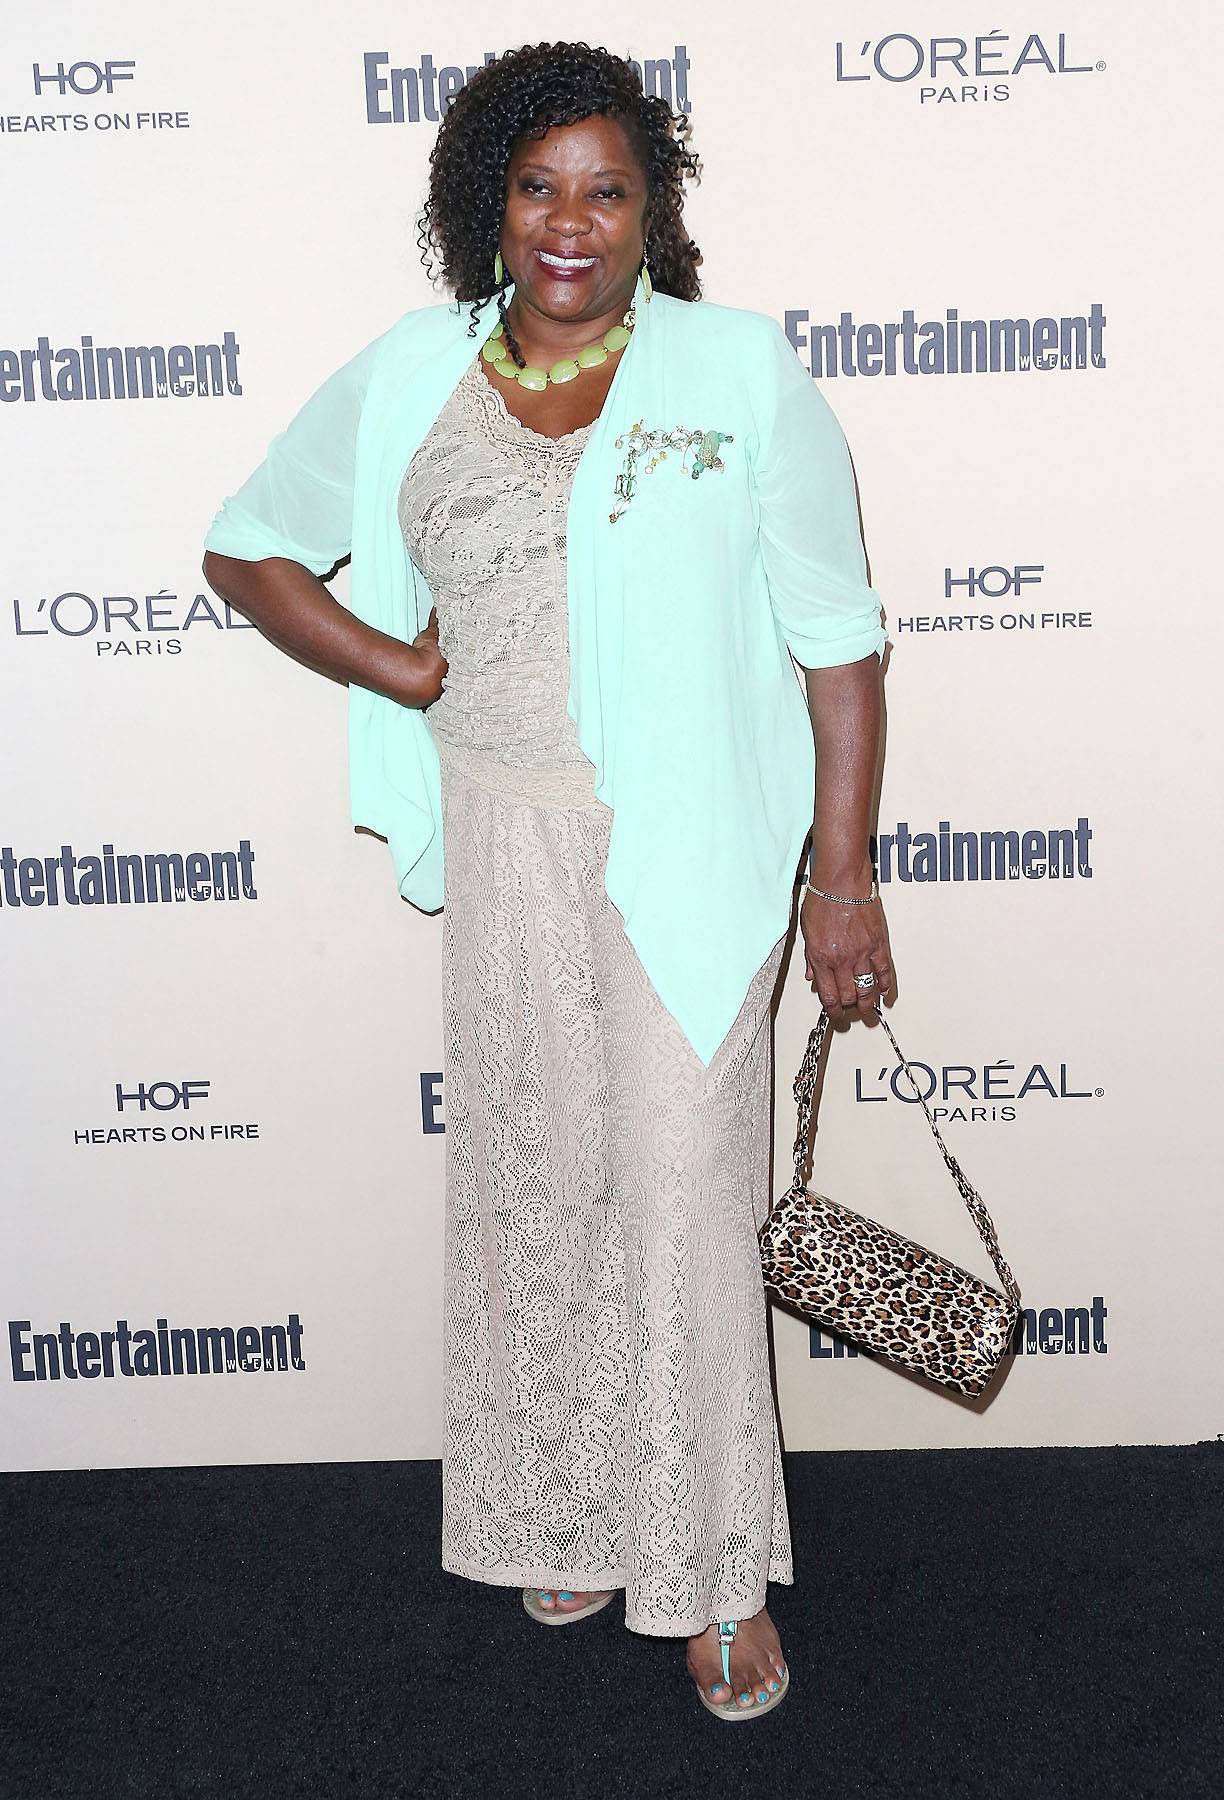 Don't Sleep! - How'd - Image 8 from 7 Things You Need to Know About Loretta  Devine | BET